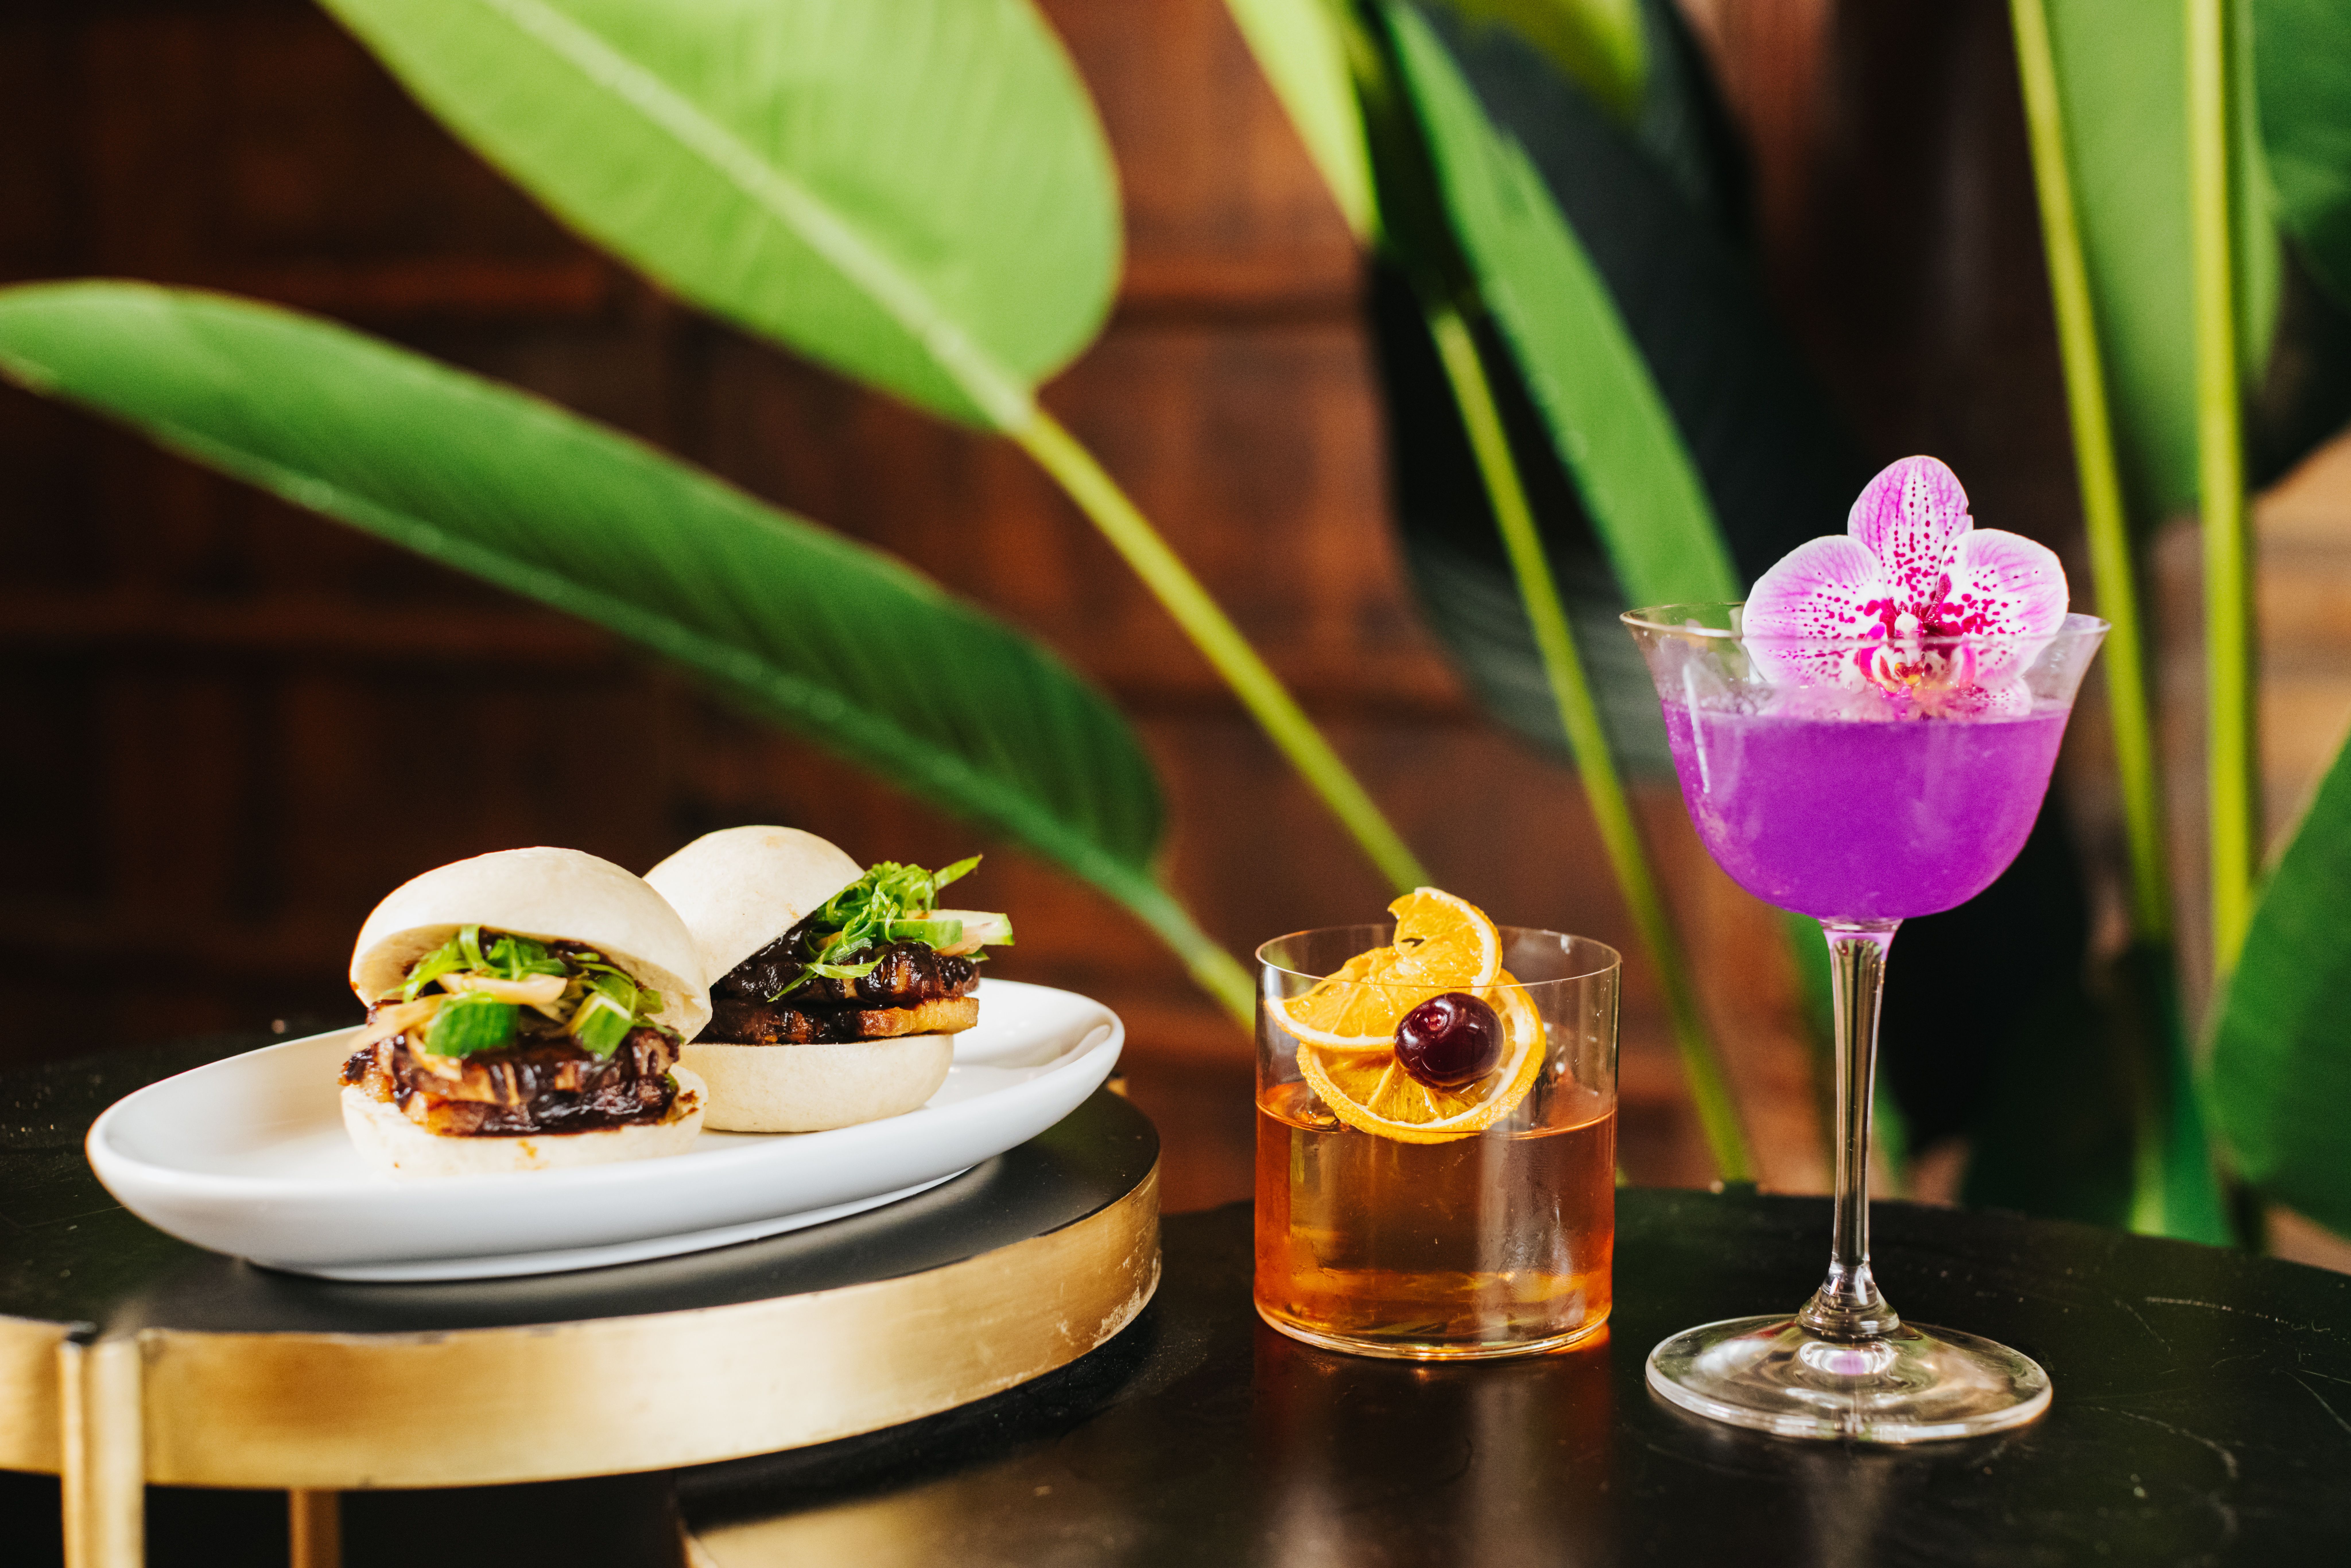 A plate of bao buns filled with pork belly next to a short brown cocktail and a tall purple cocktail garnished with an orchid.